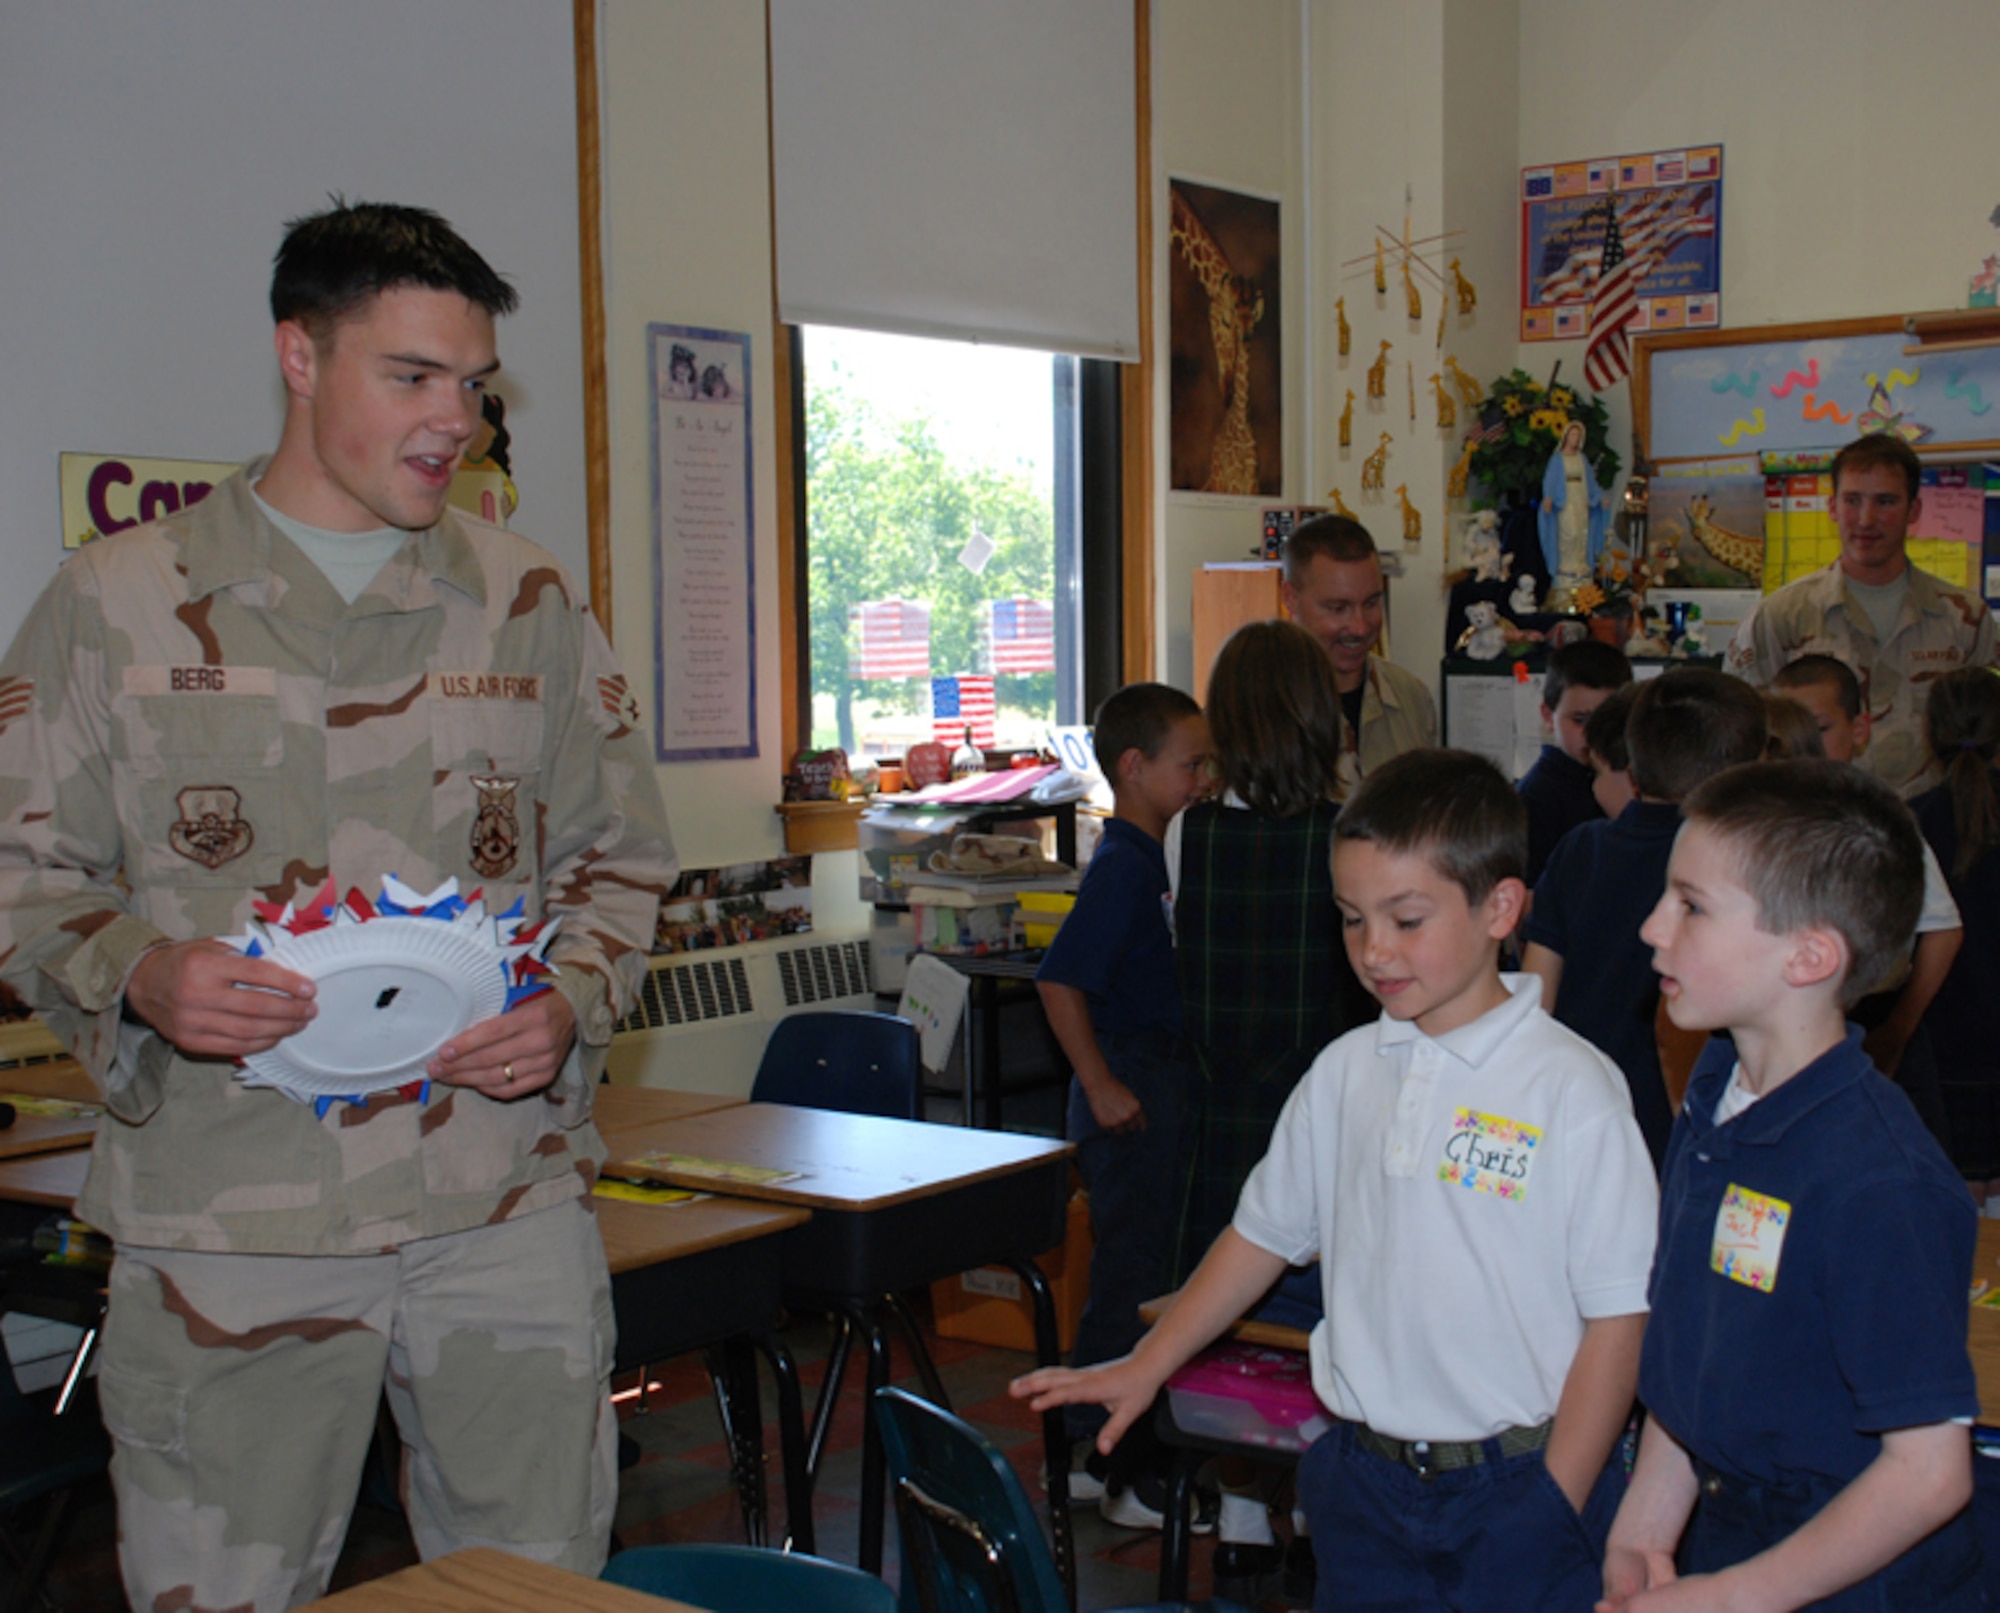 Senior Airman Jason Berg, 107th AW firefighter, talks to his pen pals, Chris and Jack, two second graders from St. Christophers elementary school who wrote to the airman while he was serving in Iraq.  Berg's pen pals presented him with patriotic artwork and thank you cards.